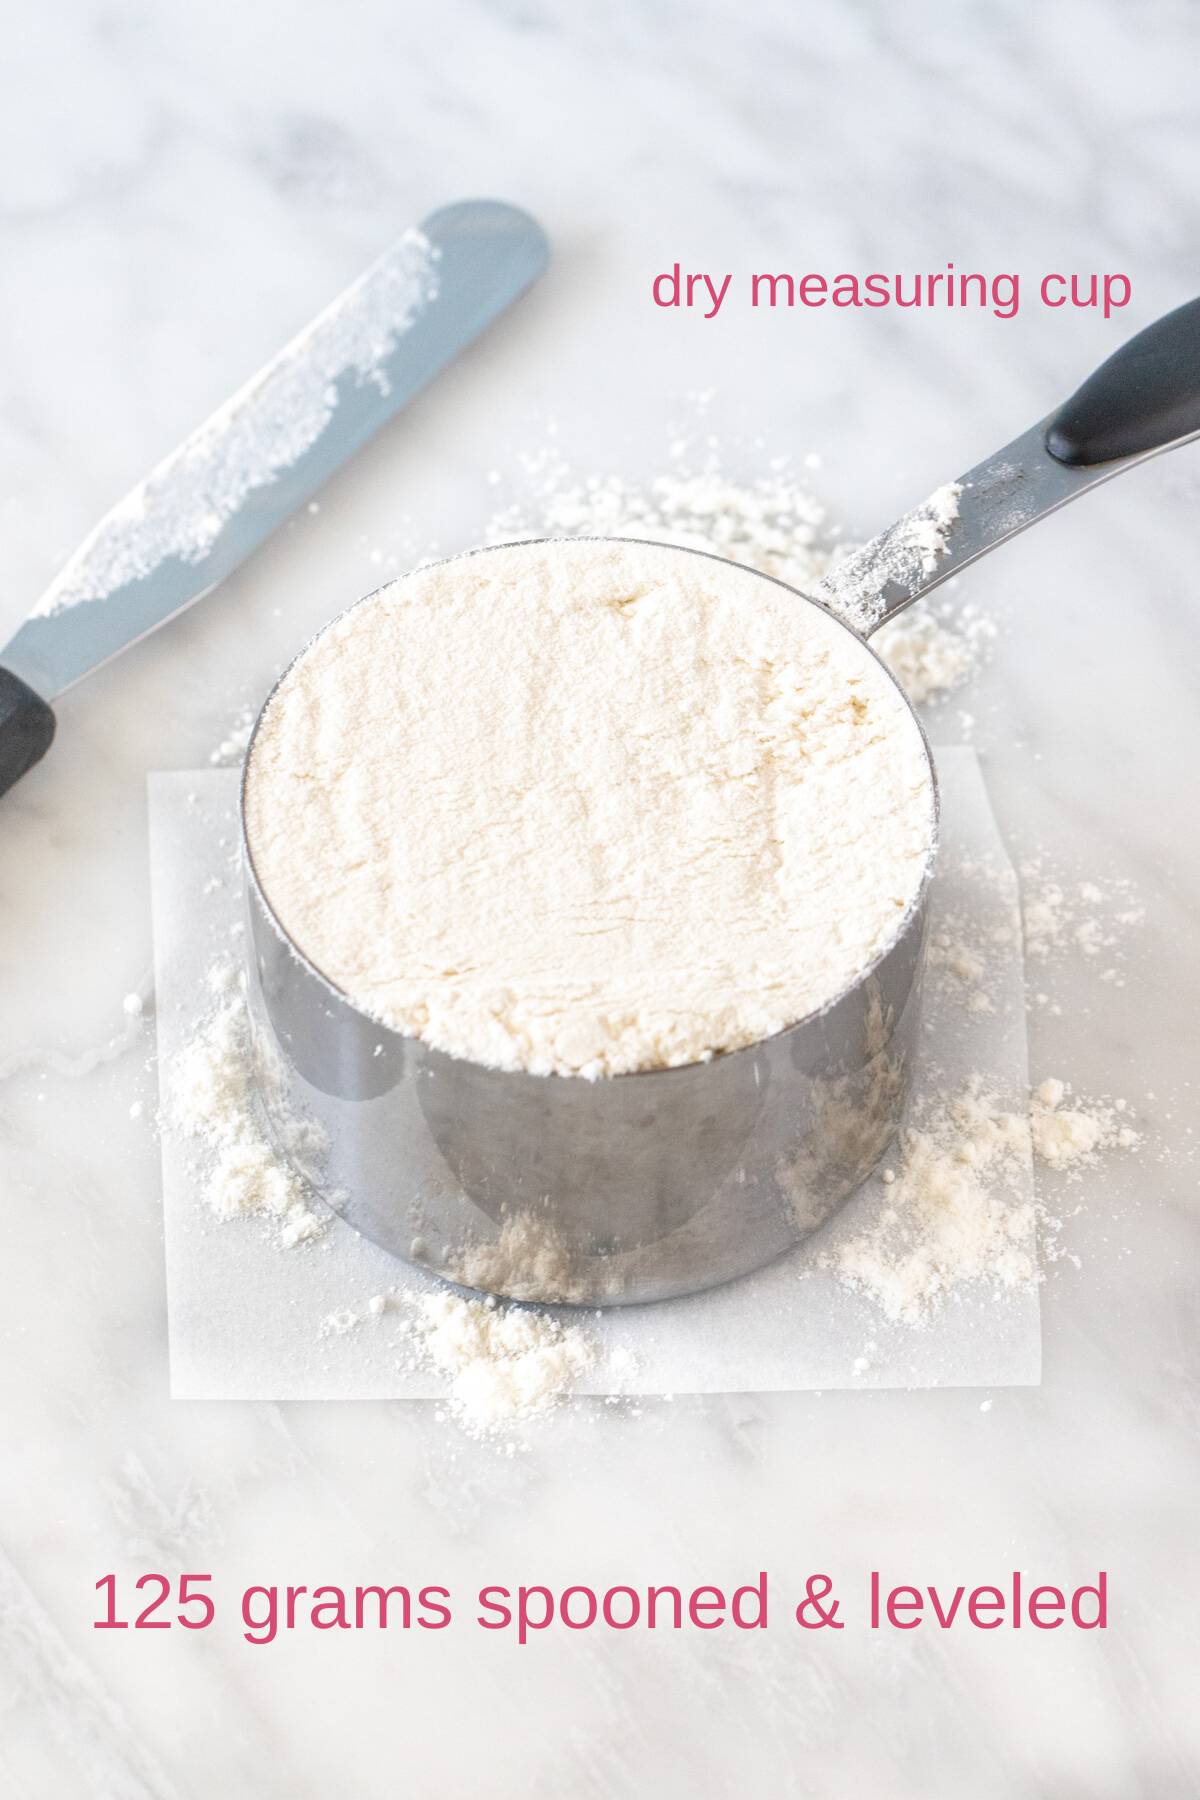 1 cup of flour measured in a dry measuring cup